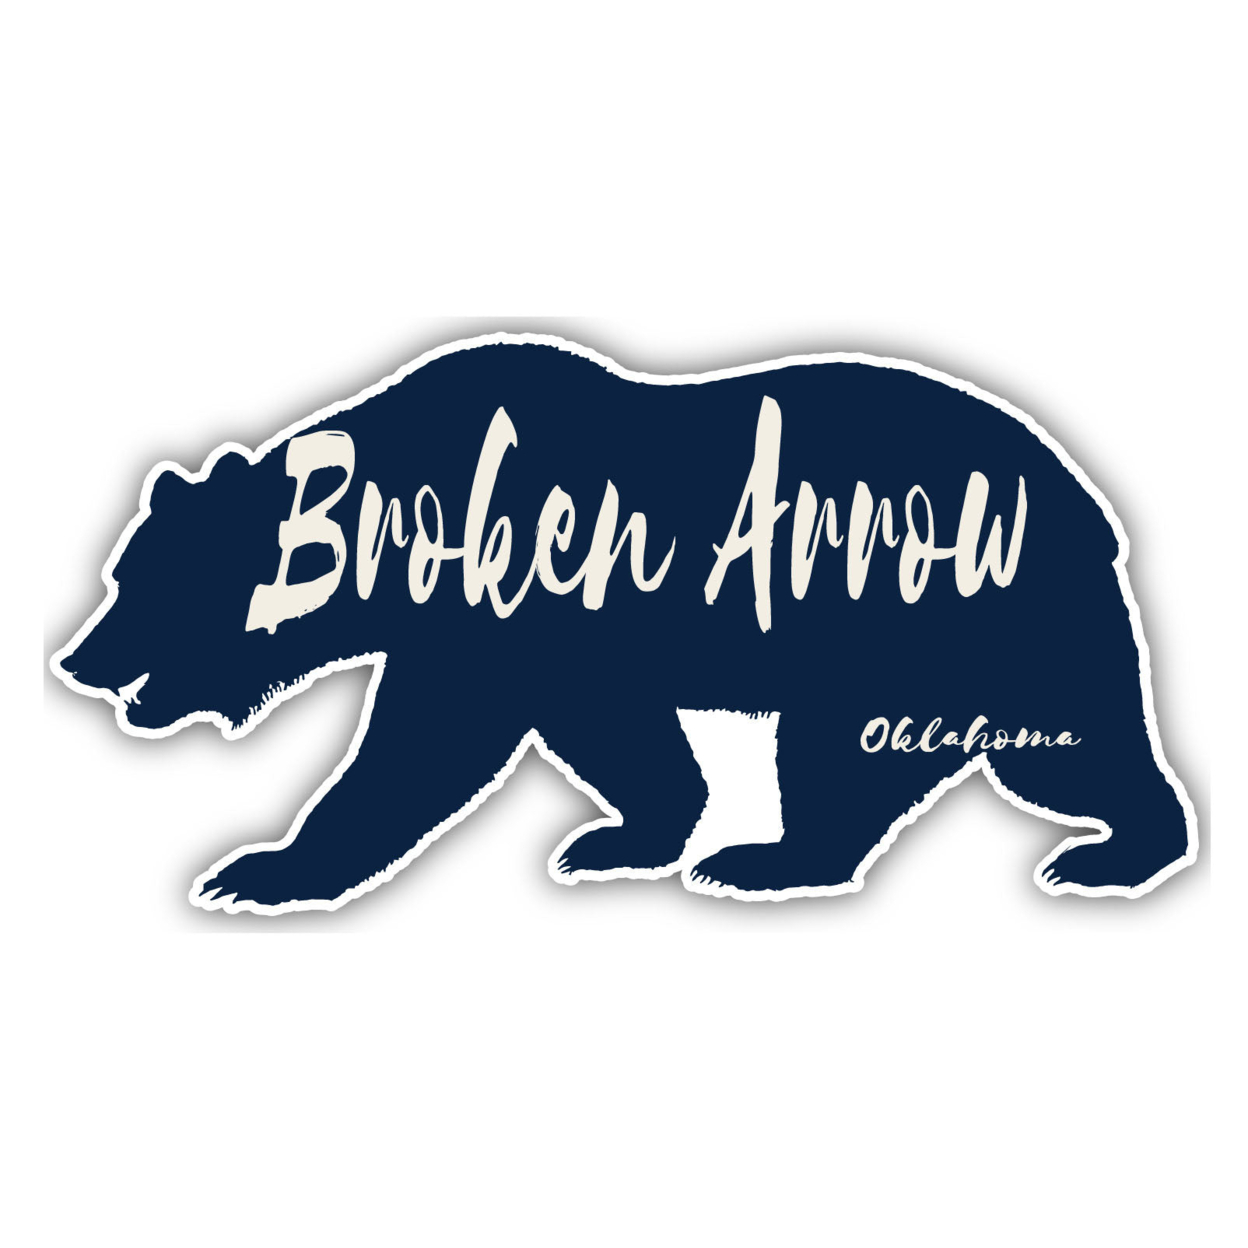 Broken Arrow Oklahoma Souvenir Decorative Stickers (Choose Theme And Size) - 4-Pack, 2-Inch, Great Outdoors